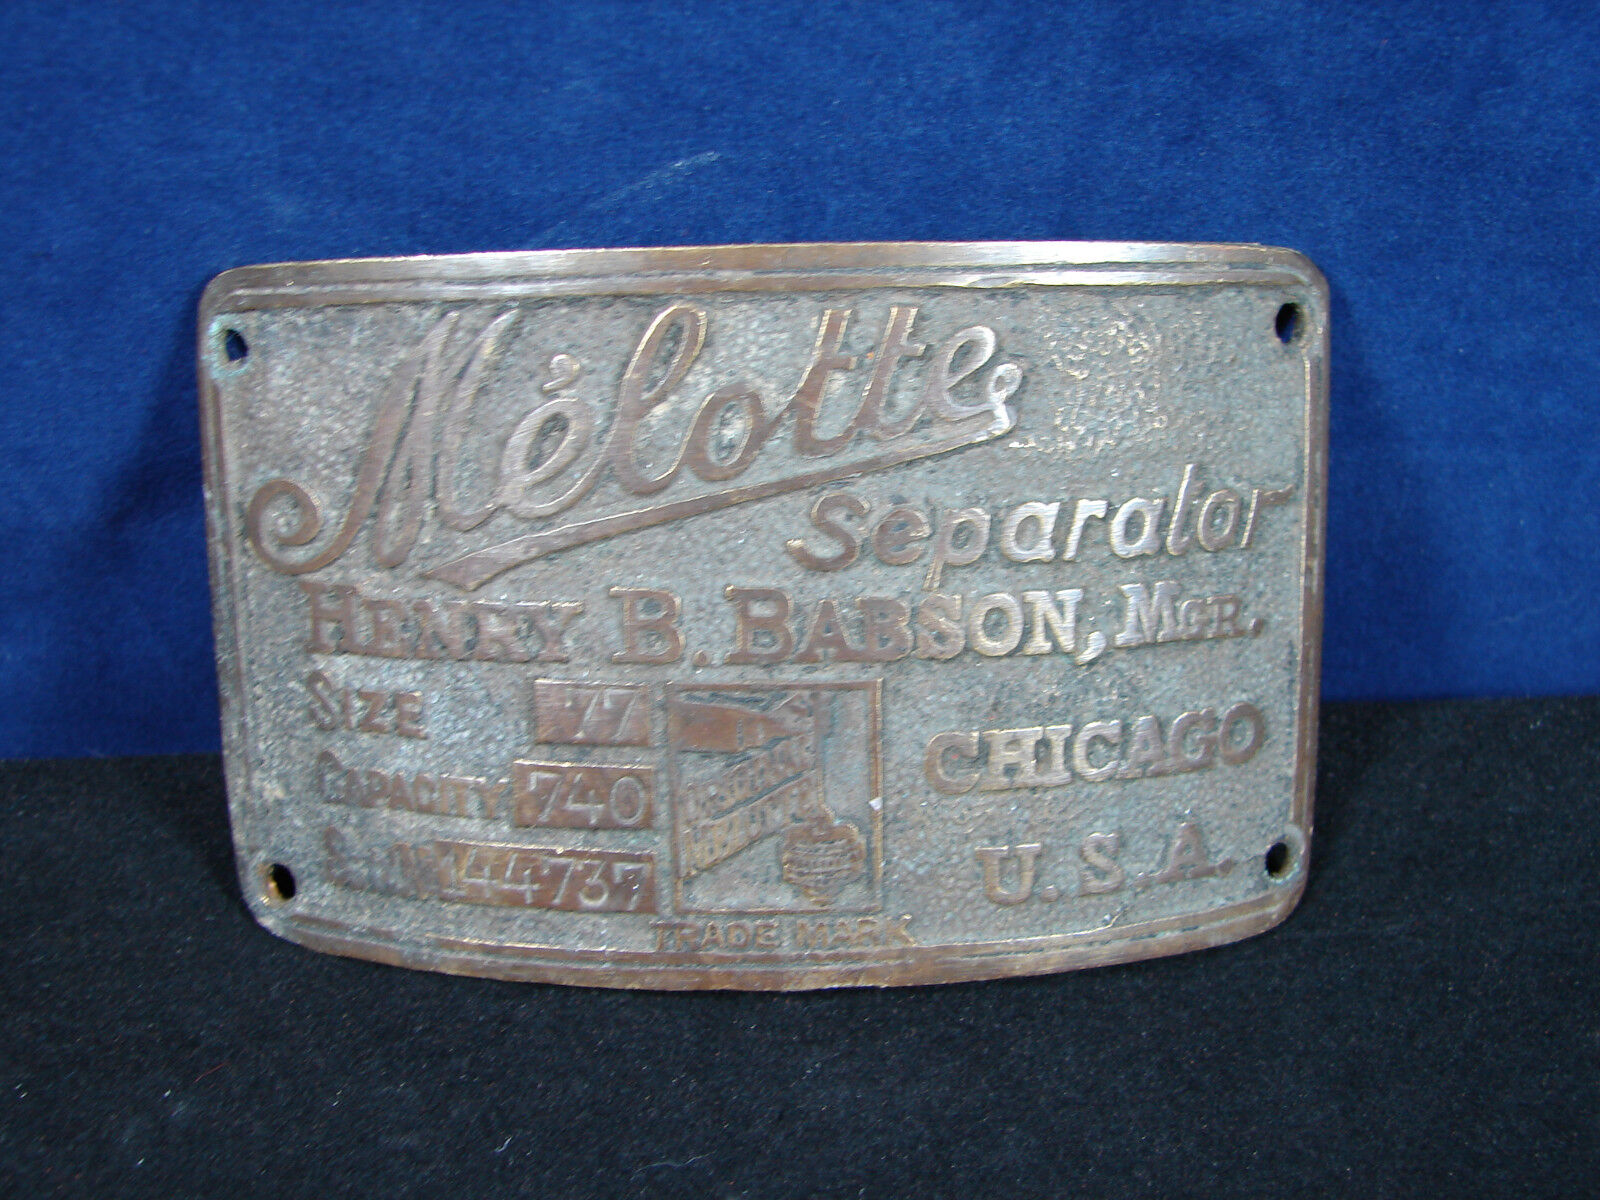 VINTAGE MELOTTE SEPARATOR Henry B. Babson, Mgr. BRASS TAG Chicago, USA RARE OLD